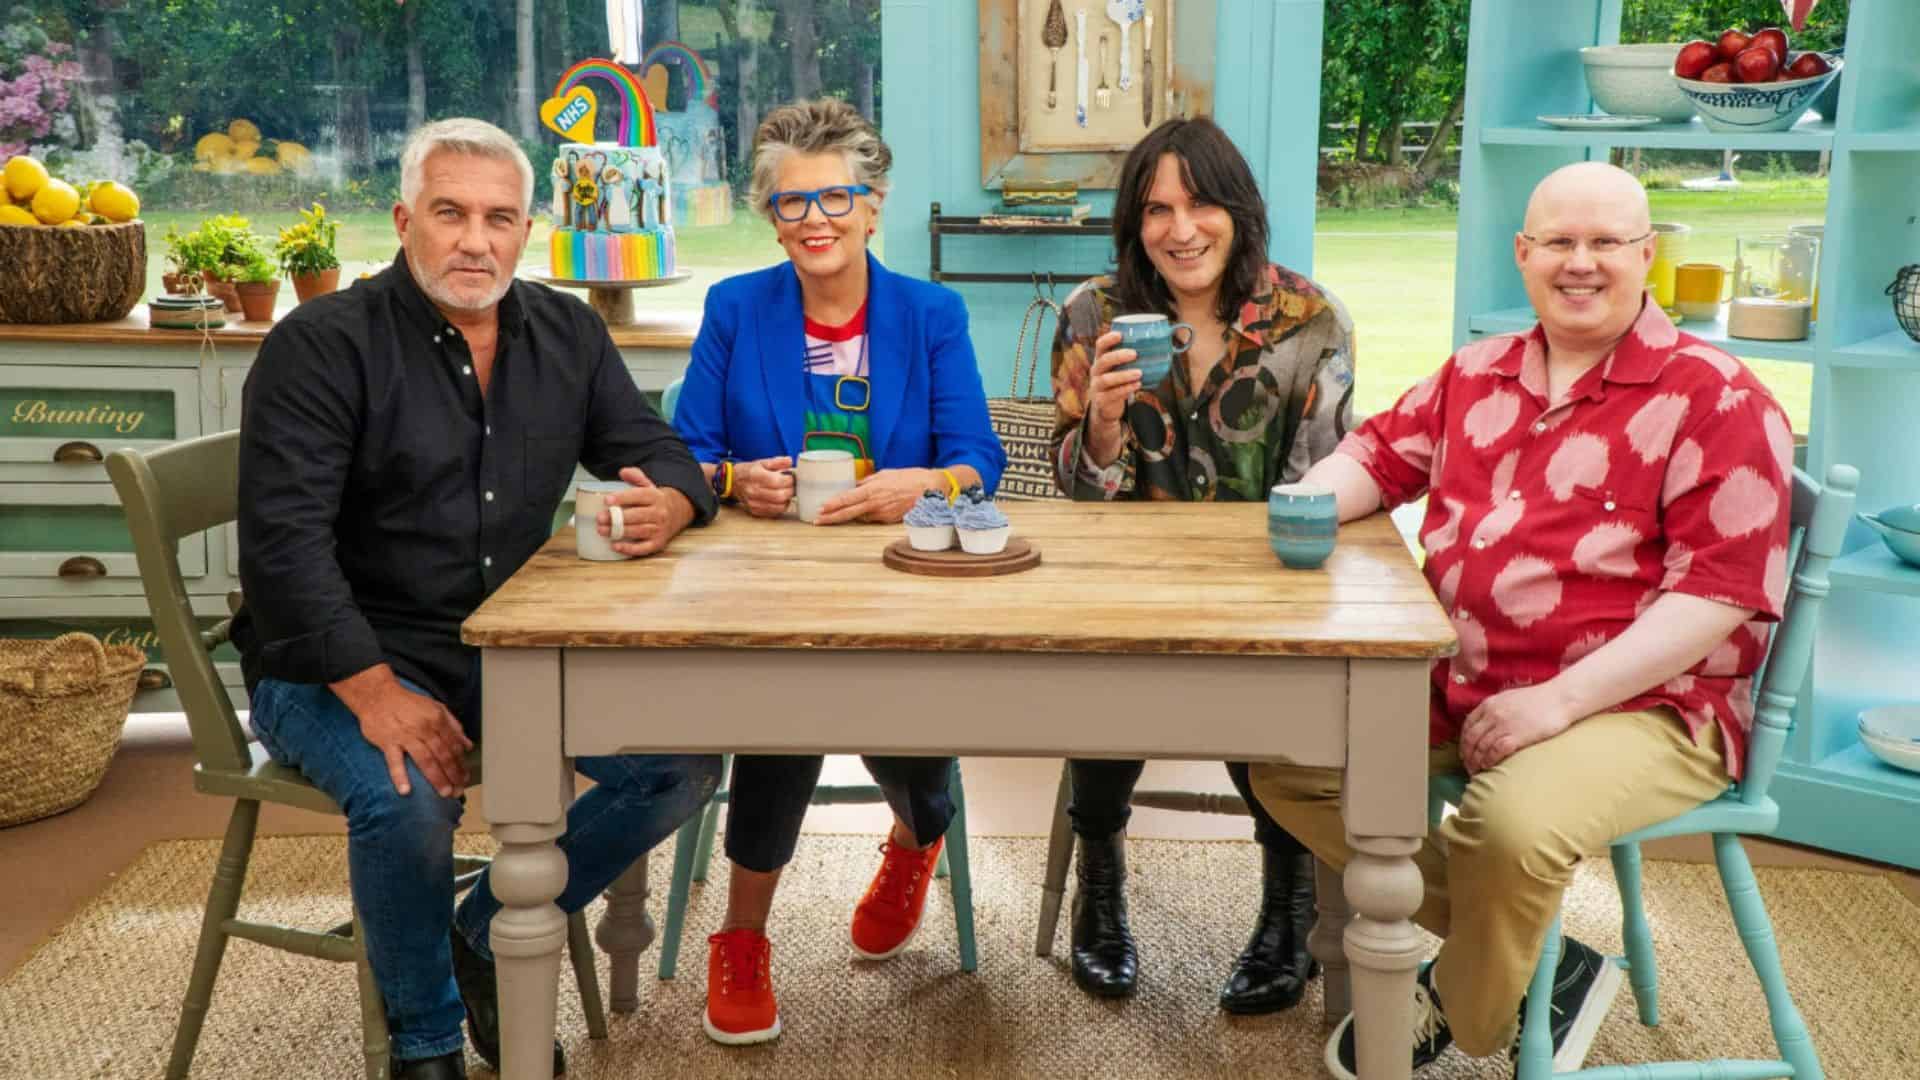 Paul Hollywood, Prue Leith, Noel Fielding, and Matt Lucas sit at a table in the Judges’ Tent in this image from Love Productions.